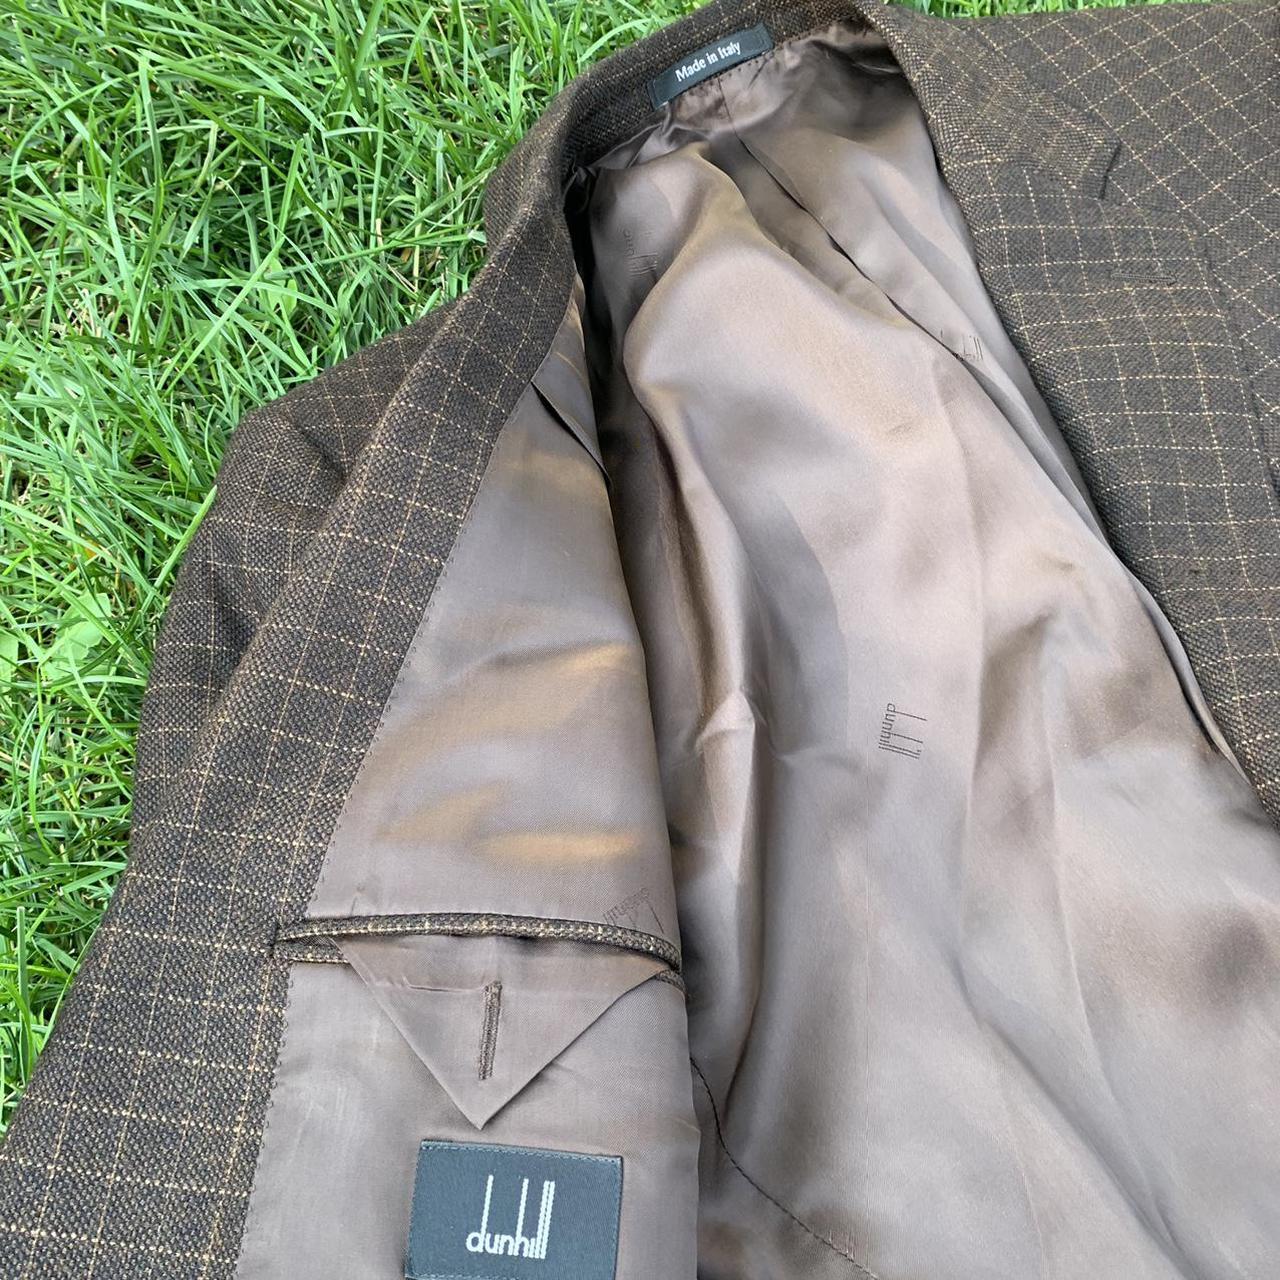 Dunhill Men's Brown and Tan Jacket (4)